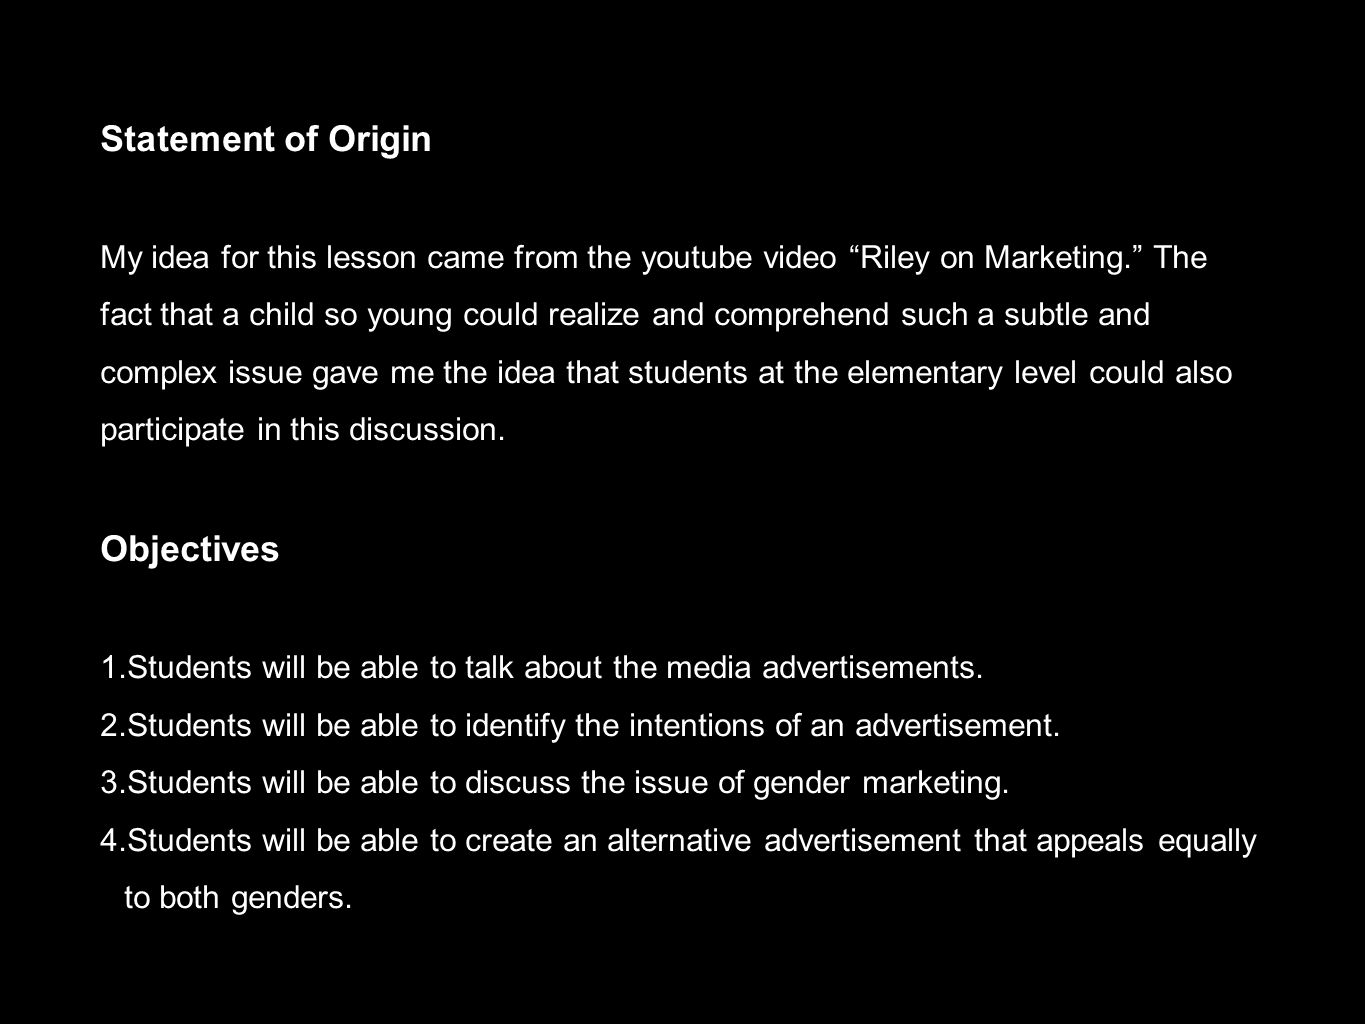 Statement of Origin My idea for this lesson came from the youtube video Riley on Marketing. The fact that a child so young could realize and comprehend such a subtle and complex issue gave me the idea that students at the elementary level could also participate in this discussion.